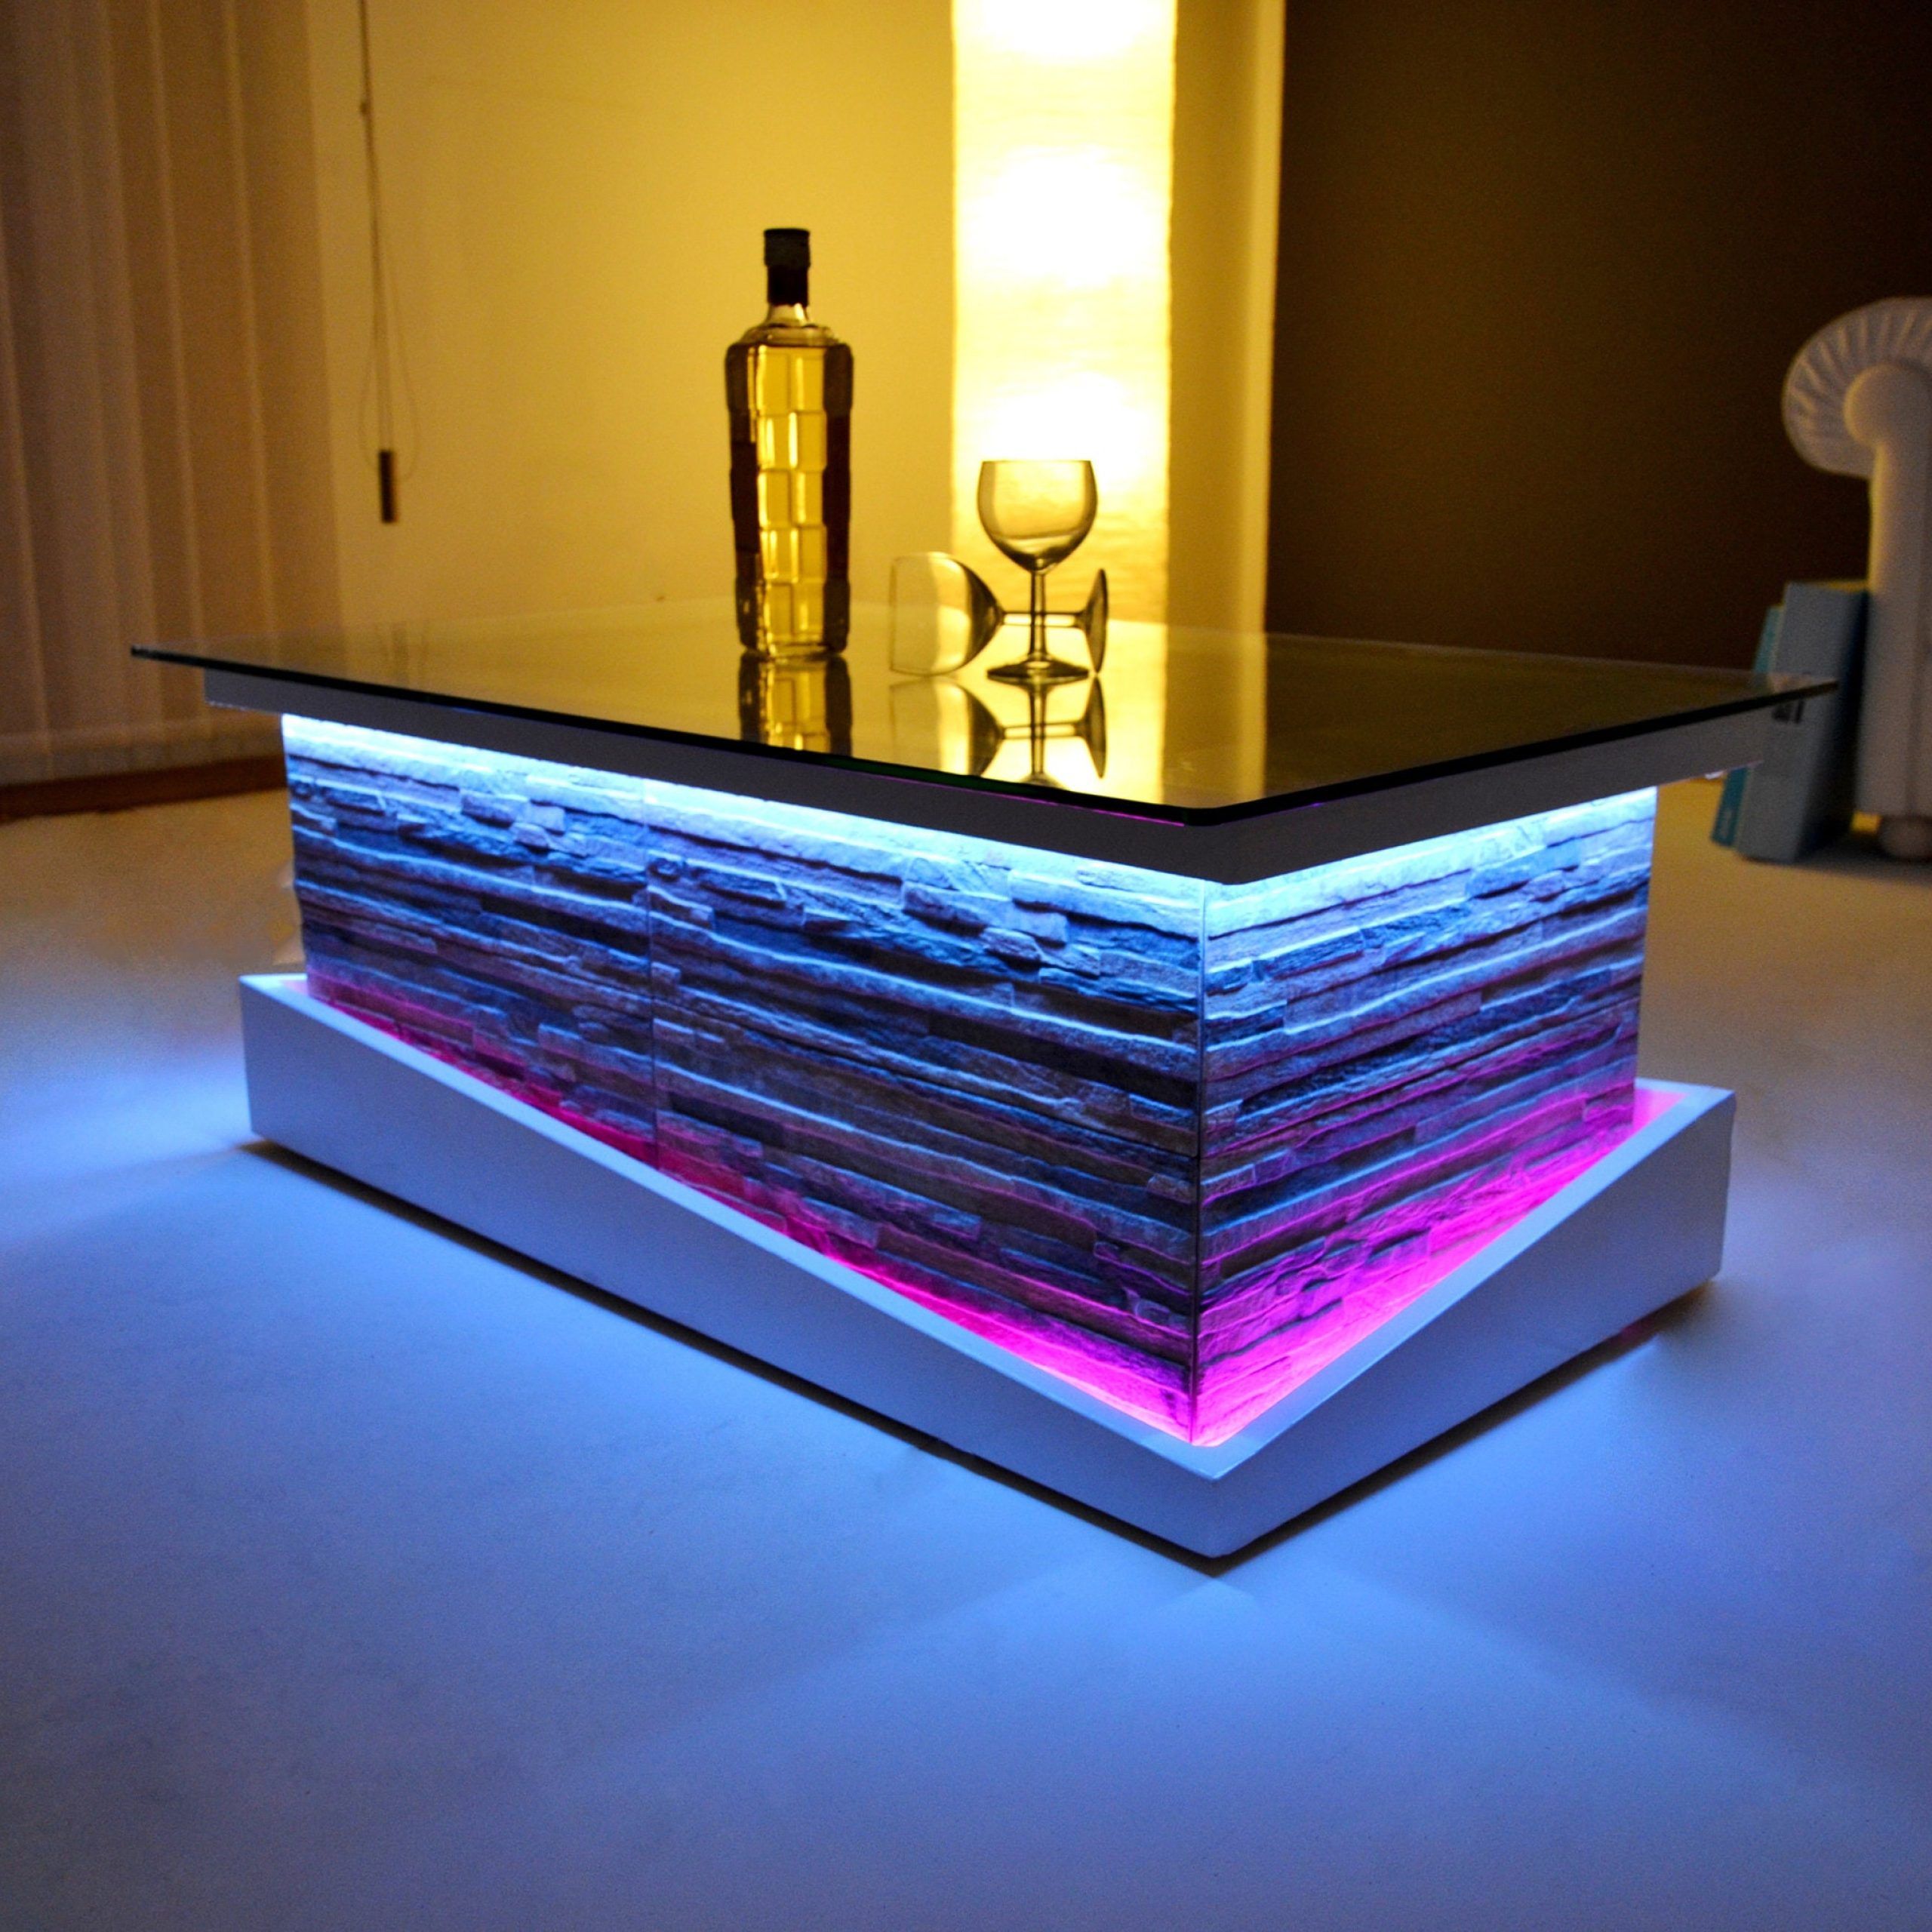 Glass Coffee Table With Led Lights Rustic / Modern Design | Etsy Pertaining To Coffee Tables With Led Lights (Gallery 3 of 20)